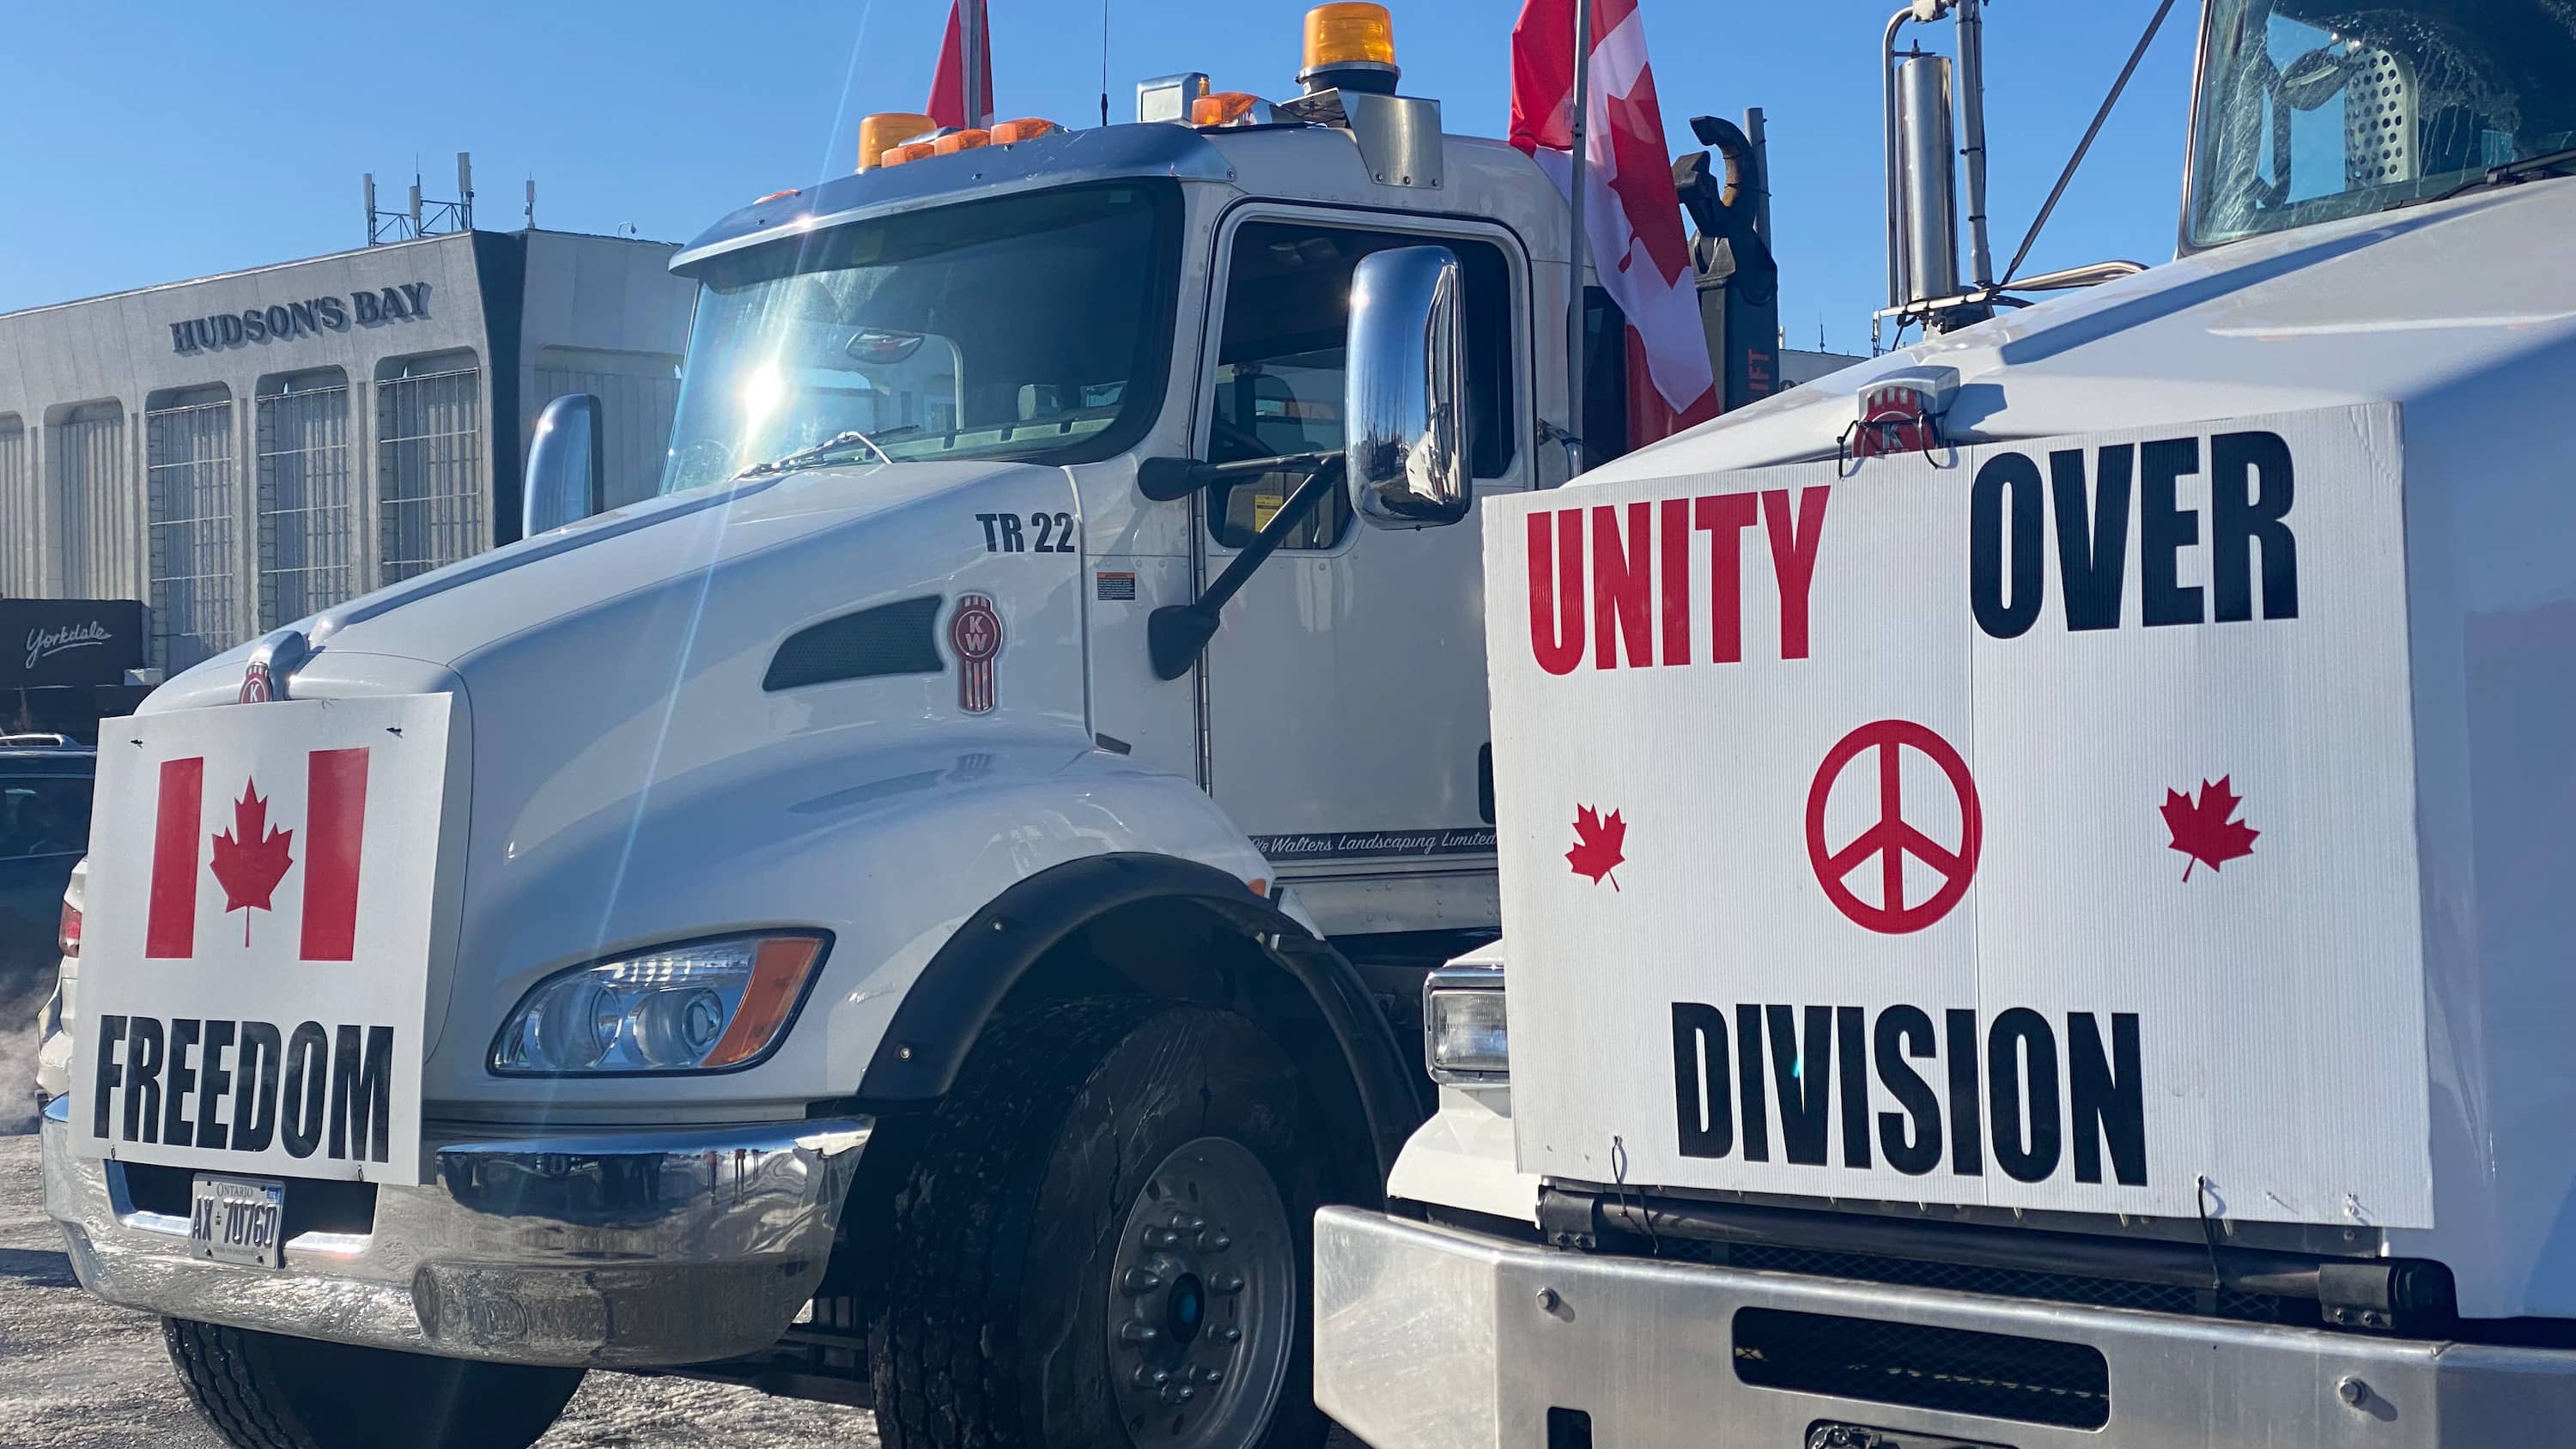 Trucks block major Toronto intersection, man charged during vaccine mandates protest